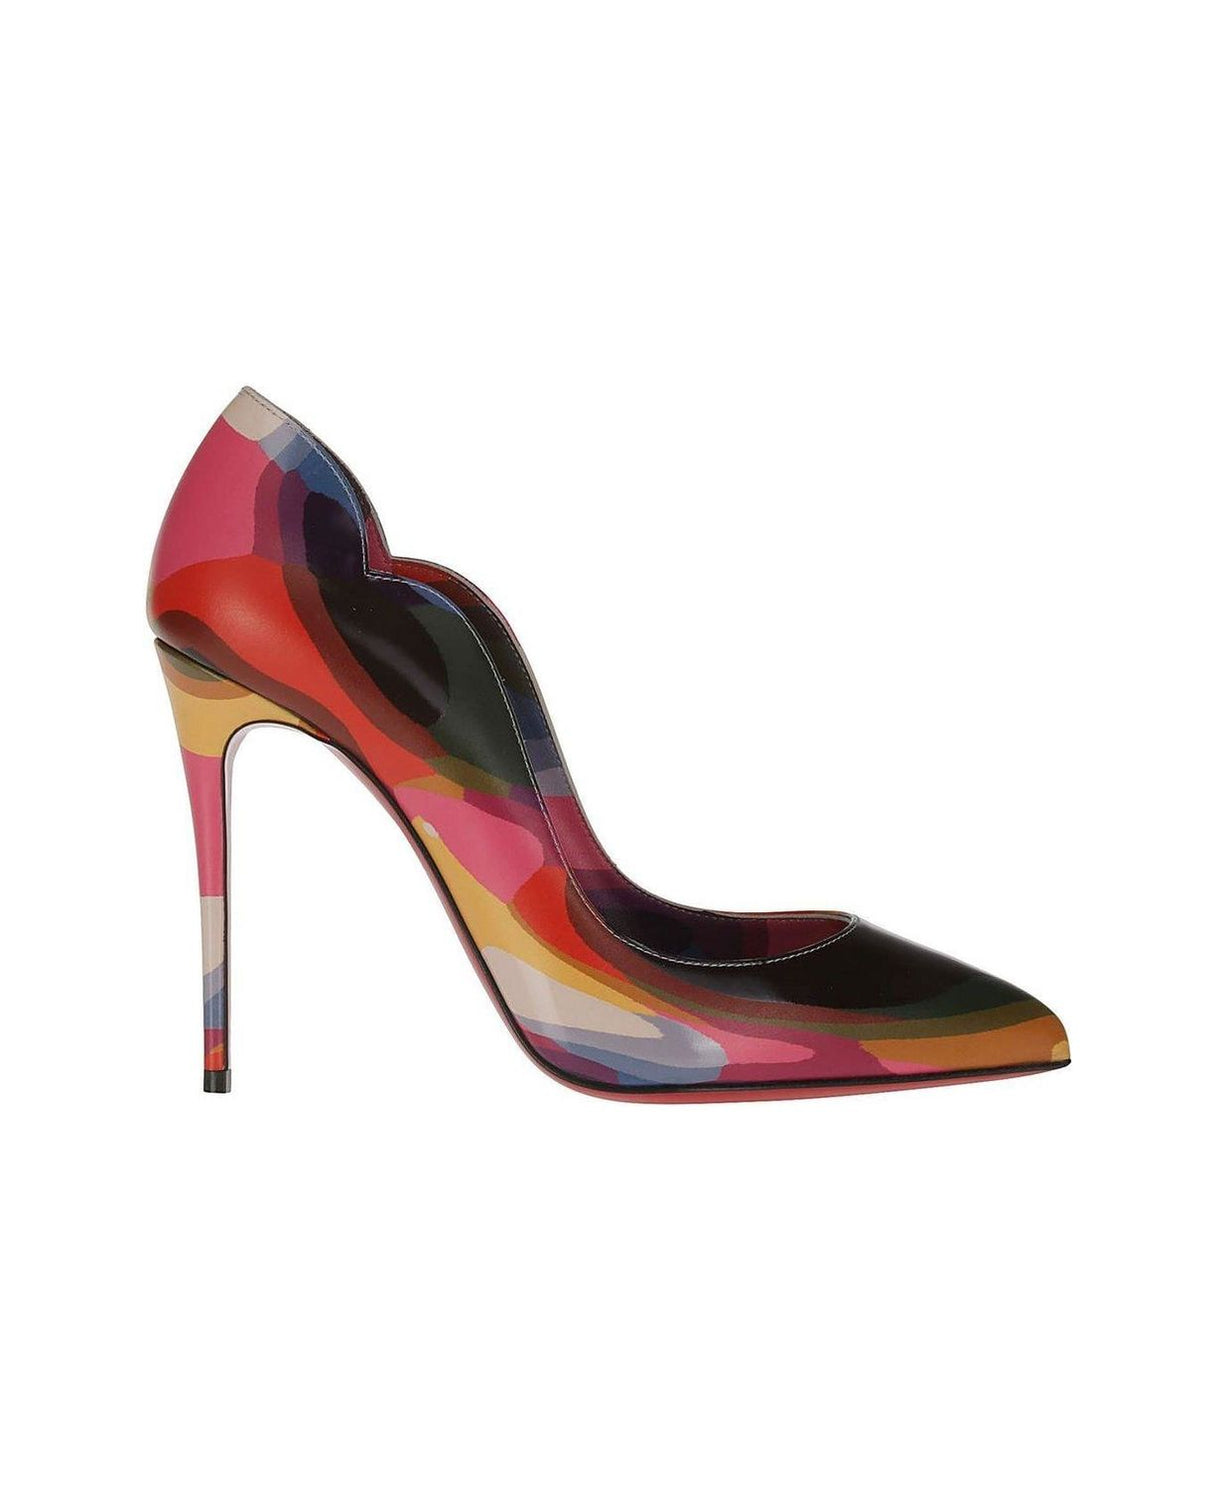 CHRISTIAN LOUBOUTIN SMOOTH GRAIN ALL-OVER ILLUSION PRINT PUMPS